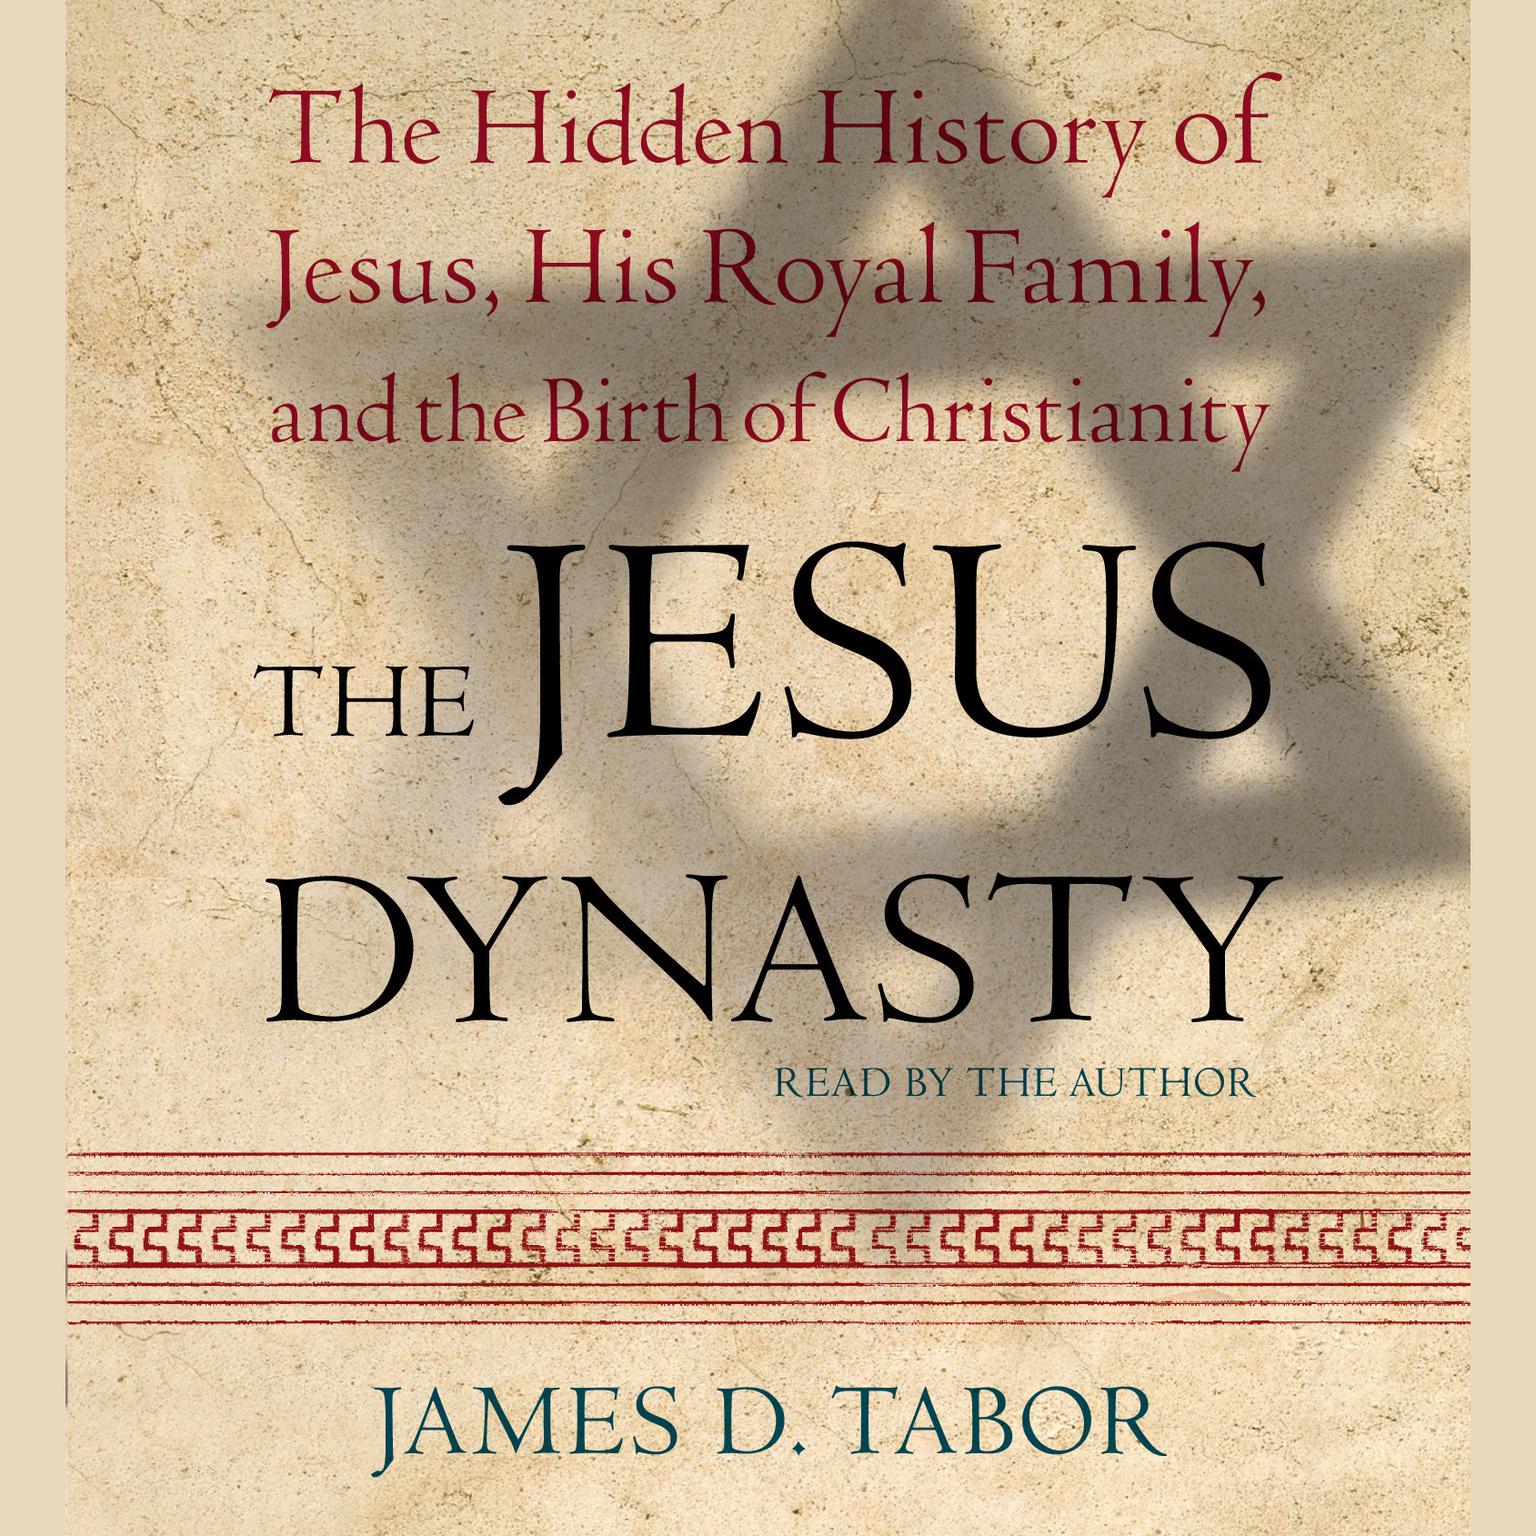 The Jesus Dynasty (Abridged): The Hidden History of Jesus, His Royal Family, and the Birth of Christianity Audiobook, by James D. Tabor